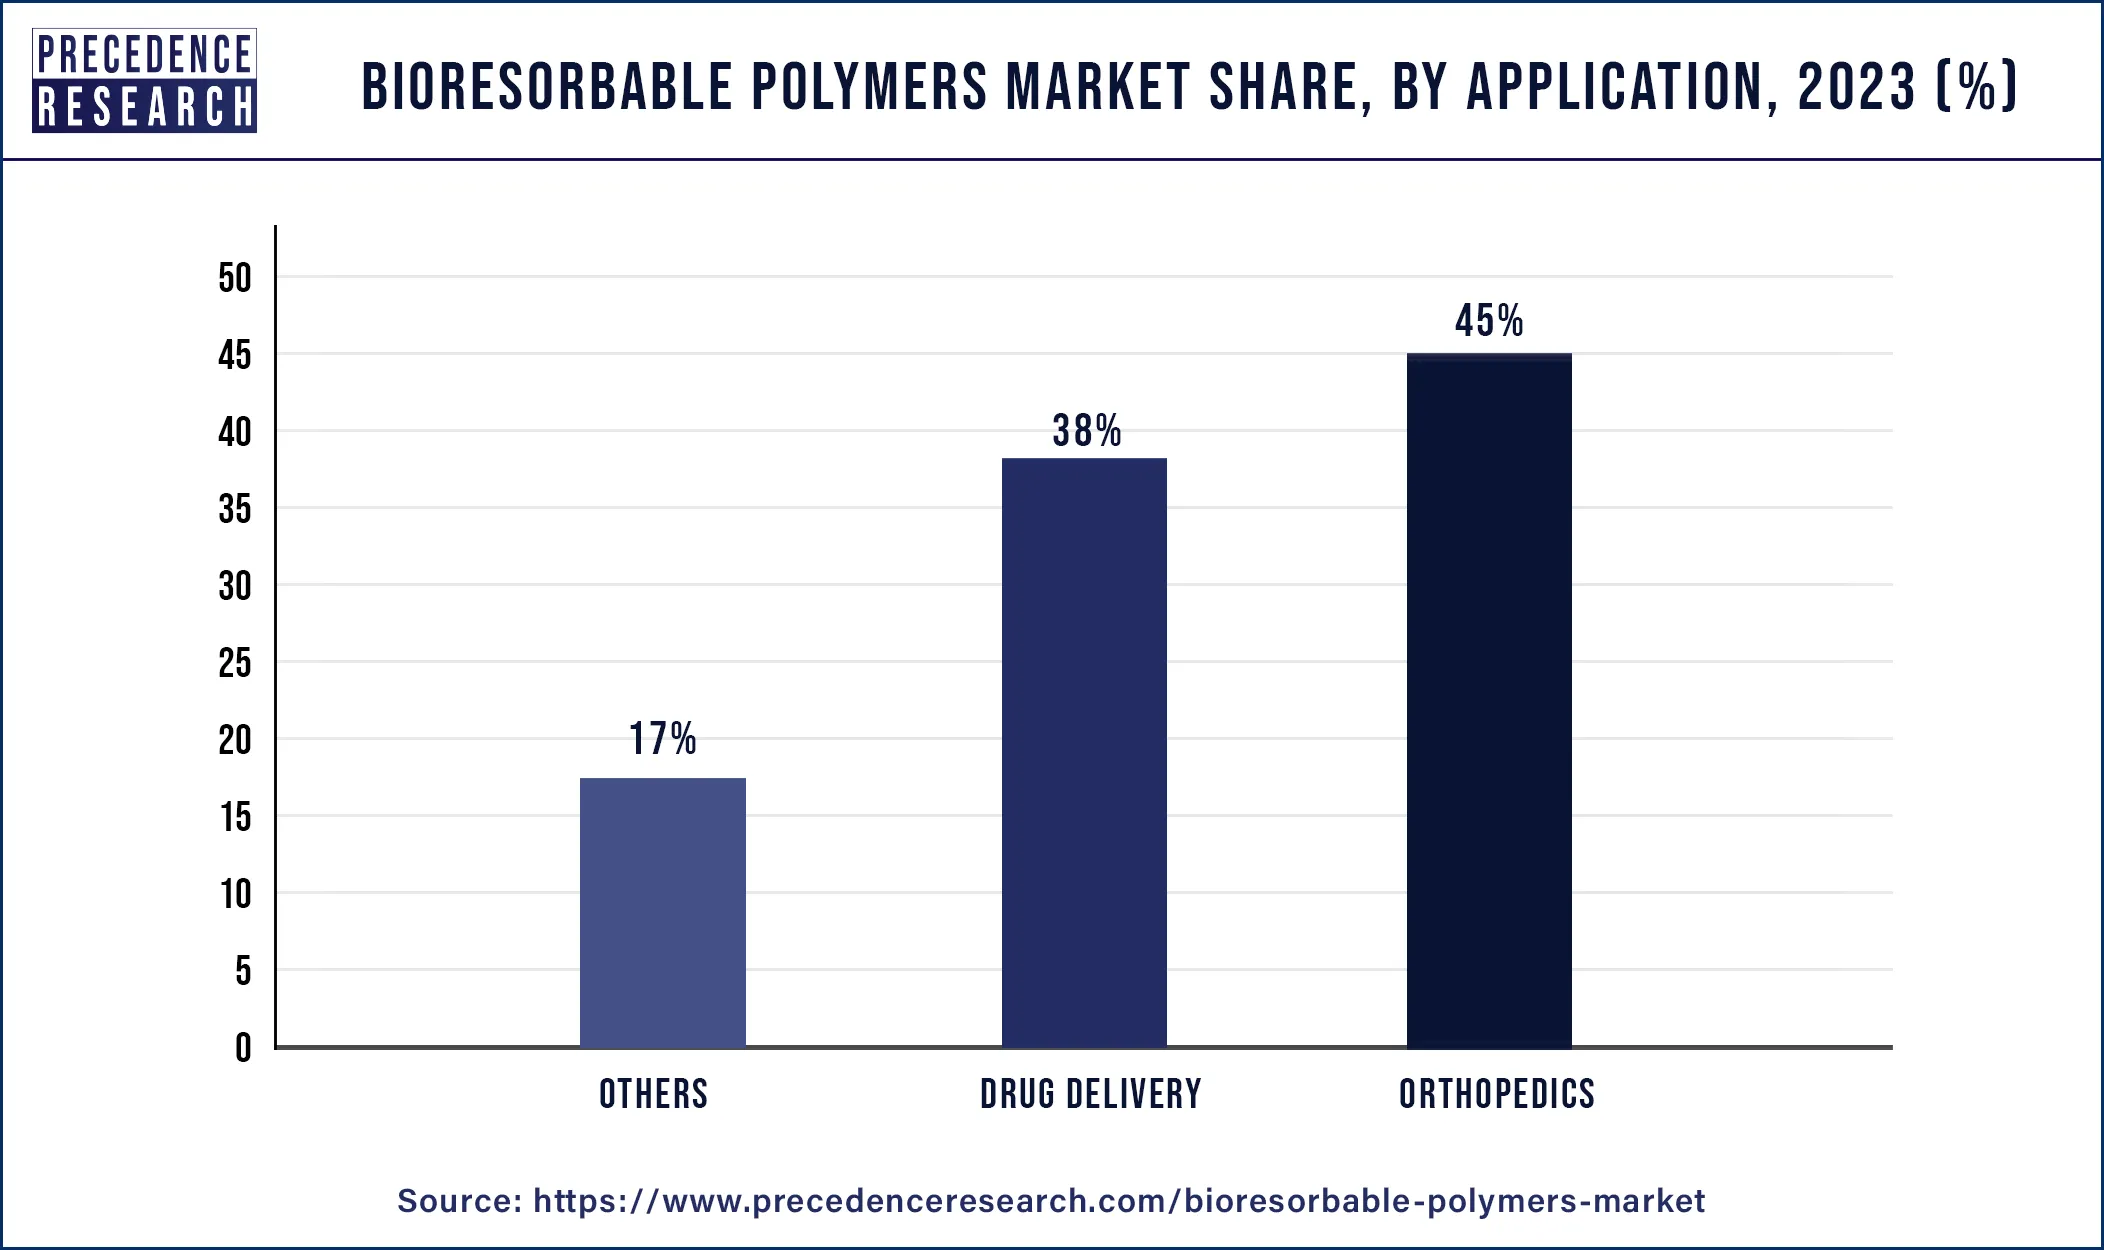 Bioresorbable Polymers Market Share, By Application, 2023 (%)